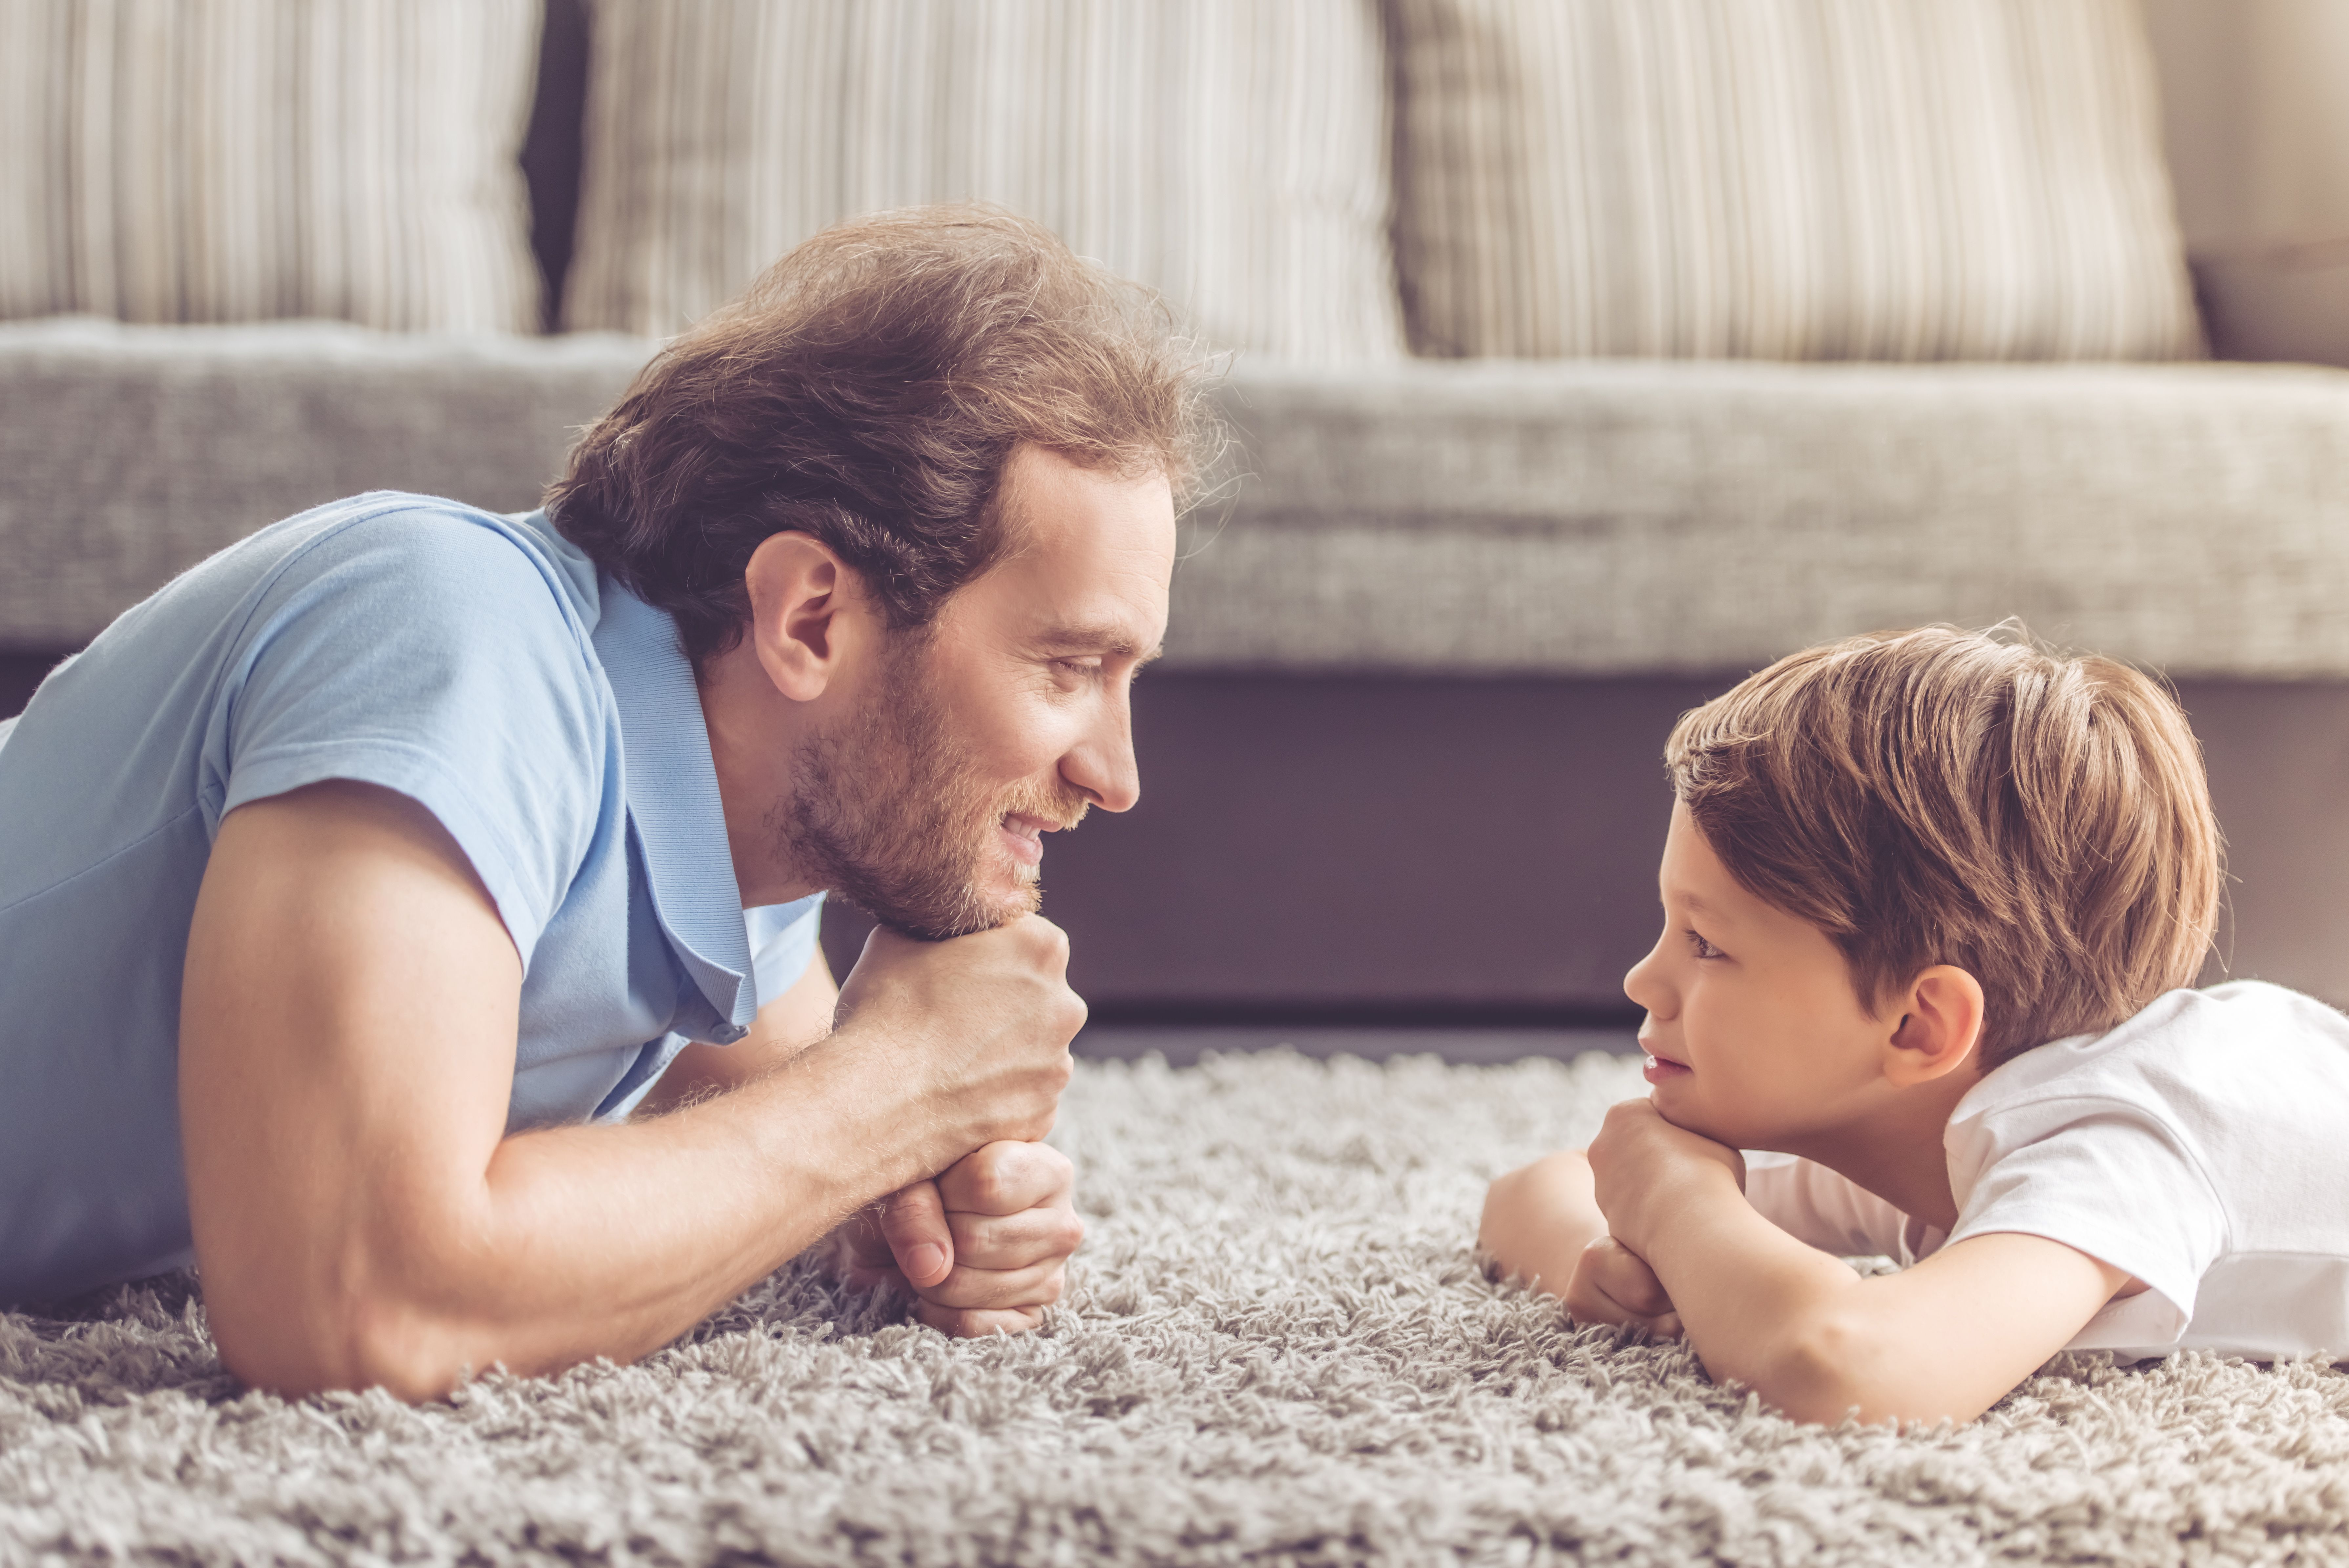 A man and a young boy looking at each other. | Source: Shutterstock